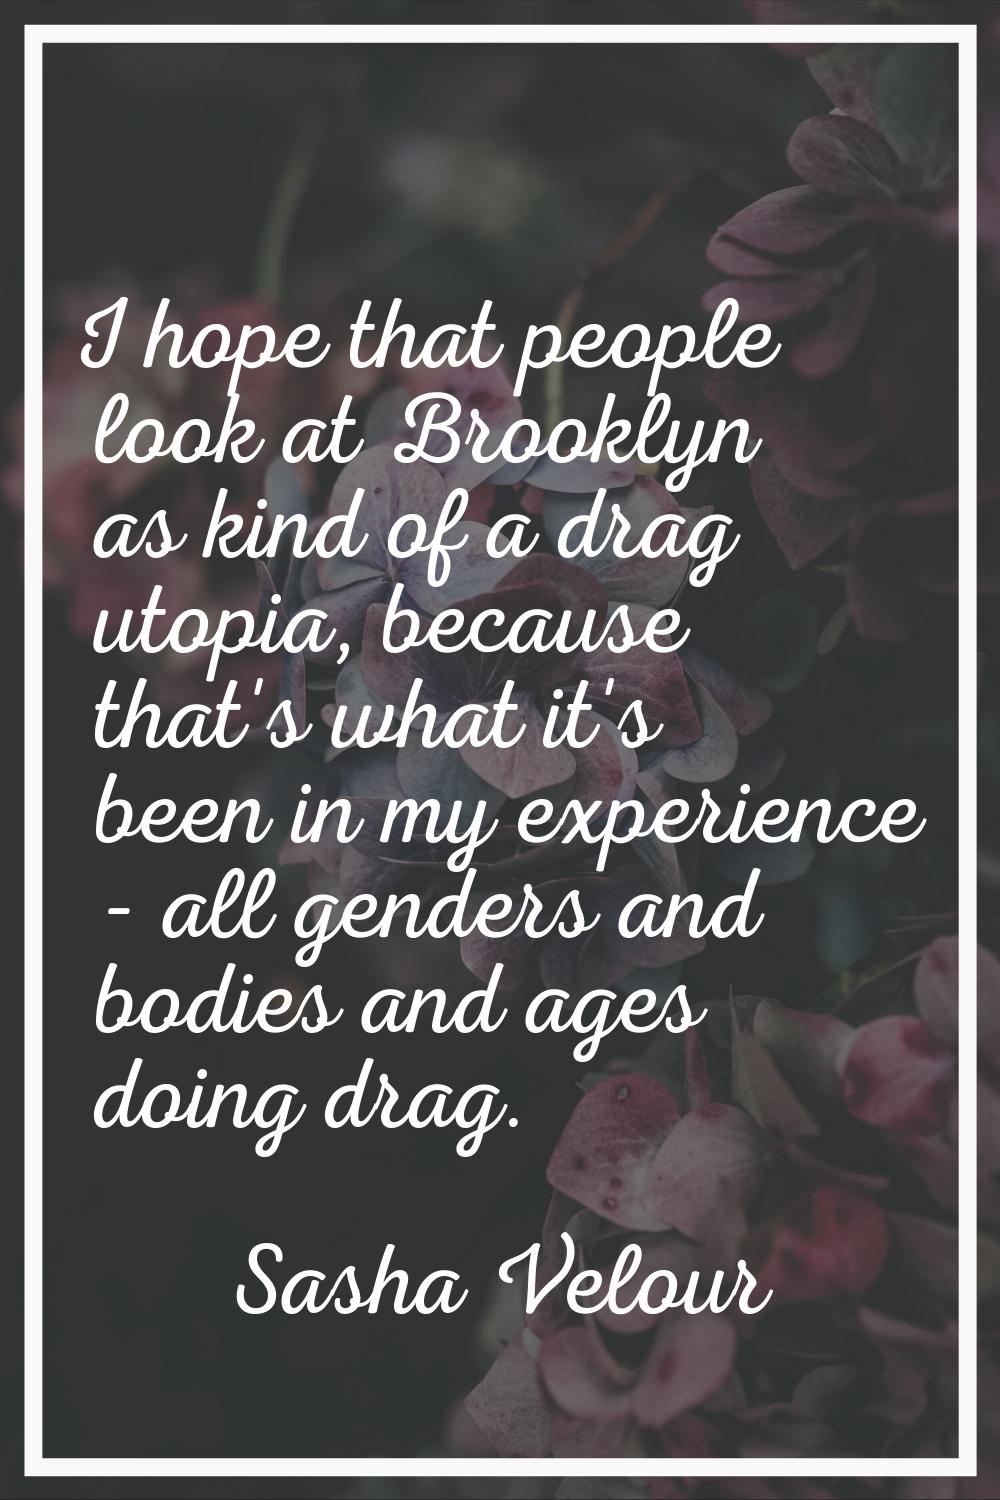 I hope that people look at Brooklyn as kind of a drag utopia, because that's what it's been in my e